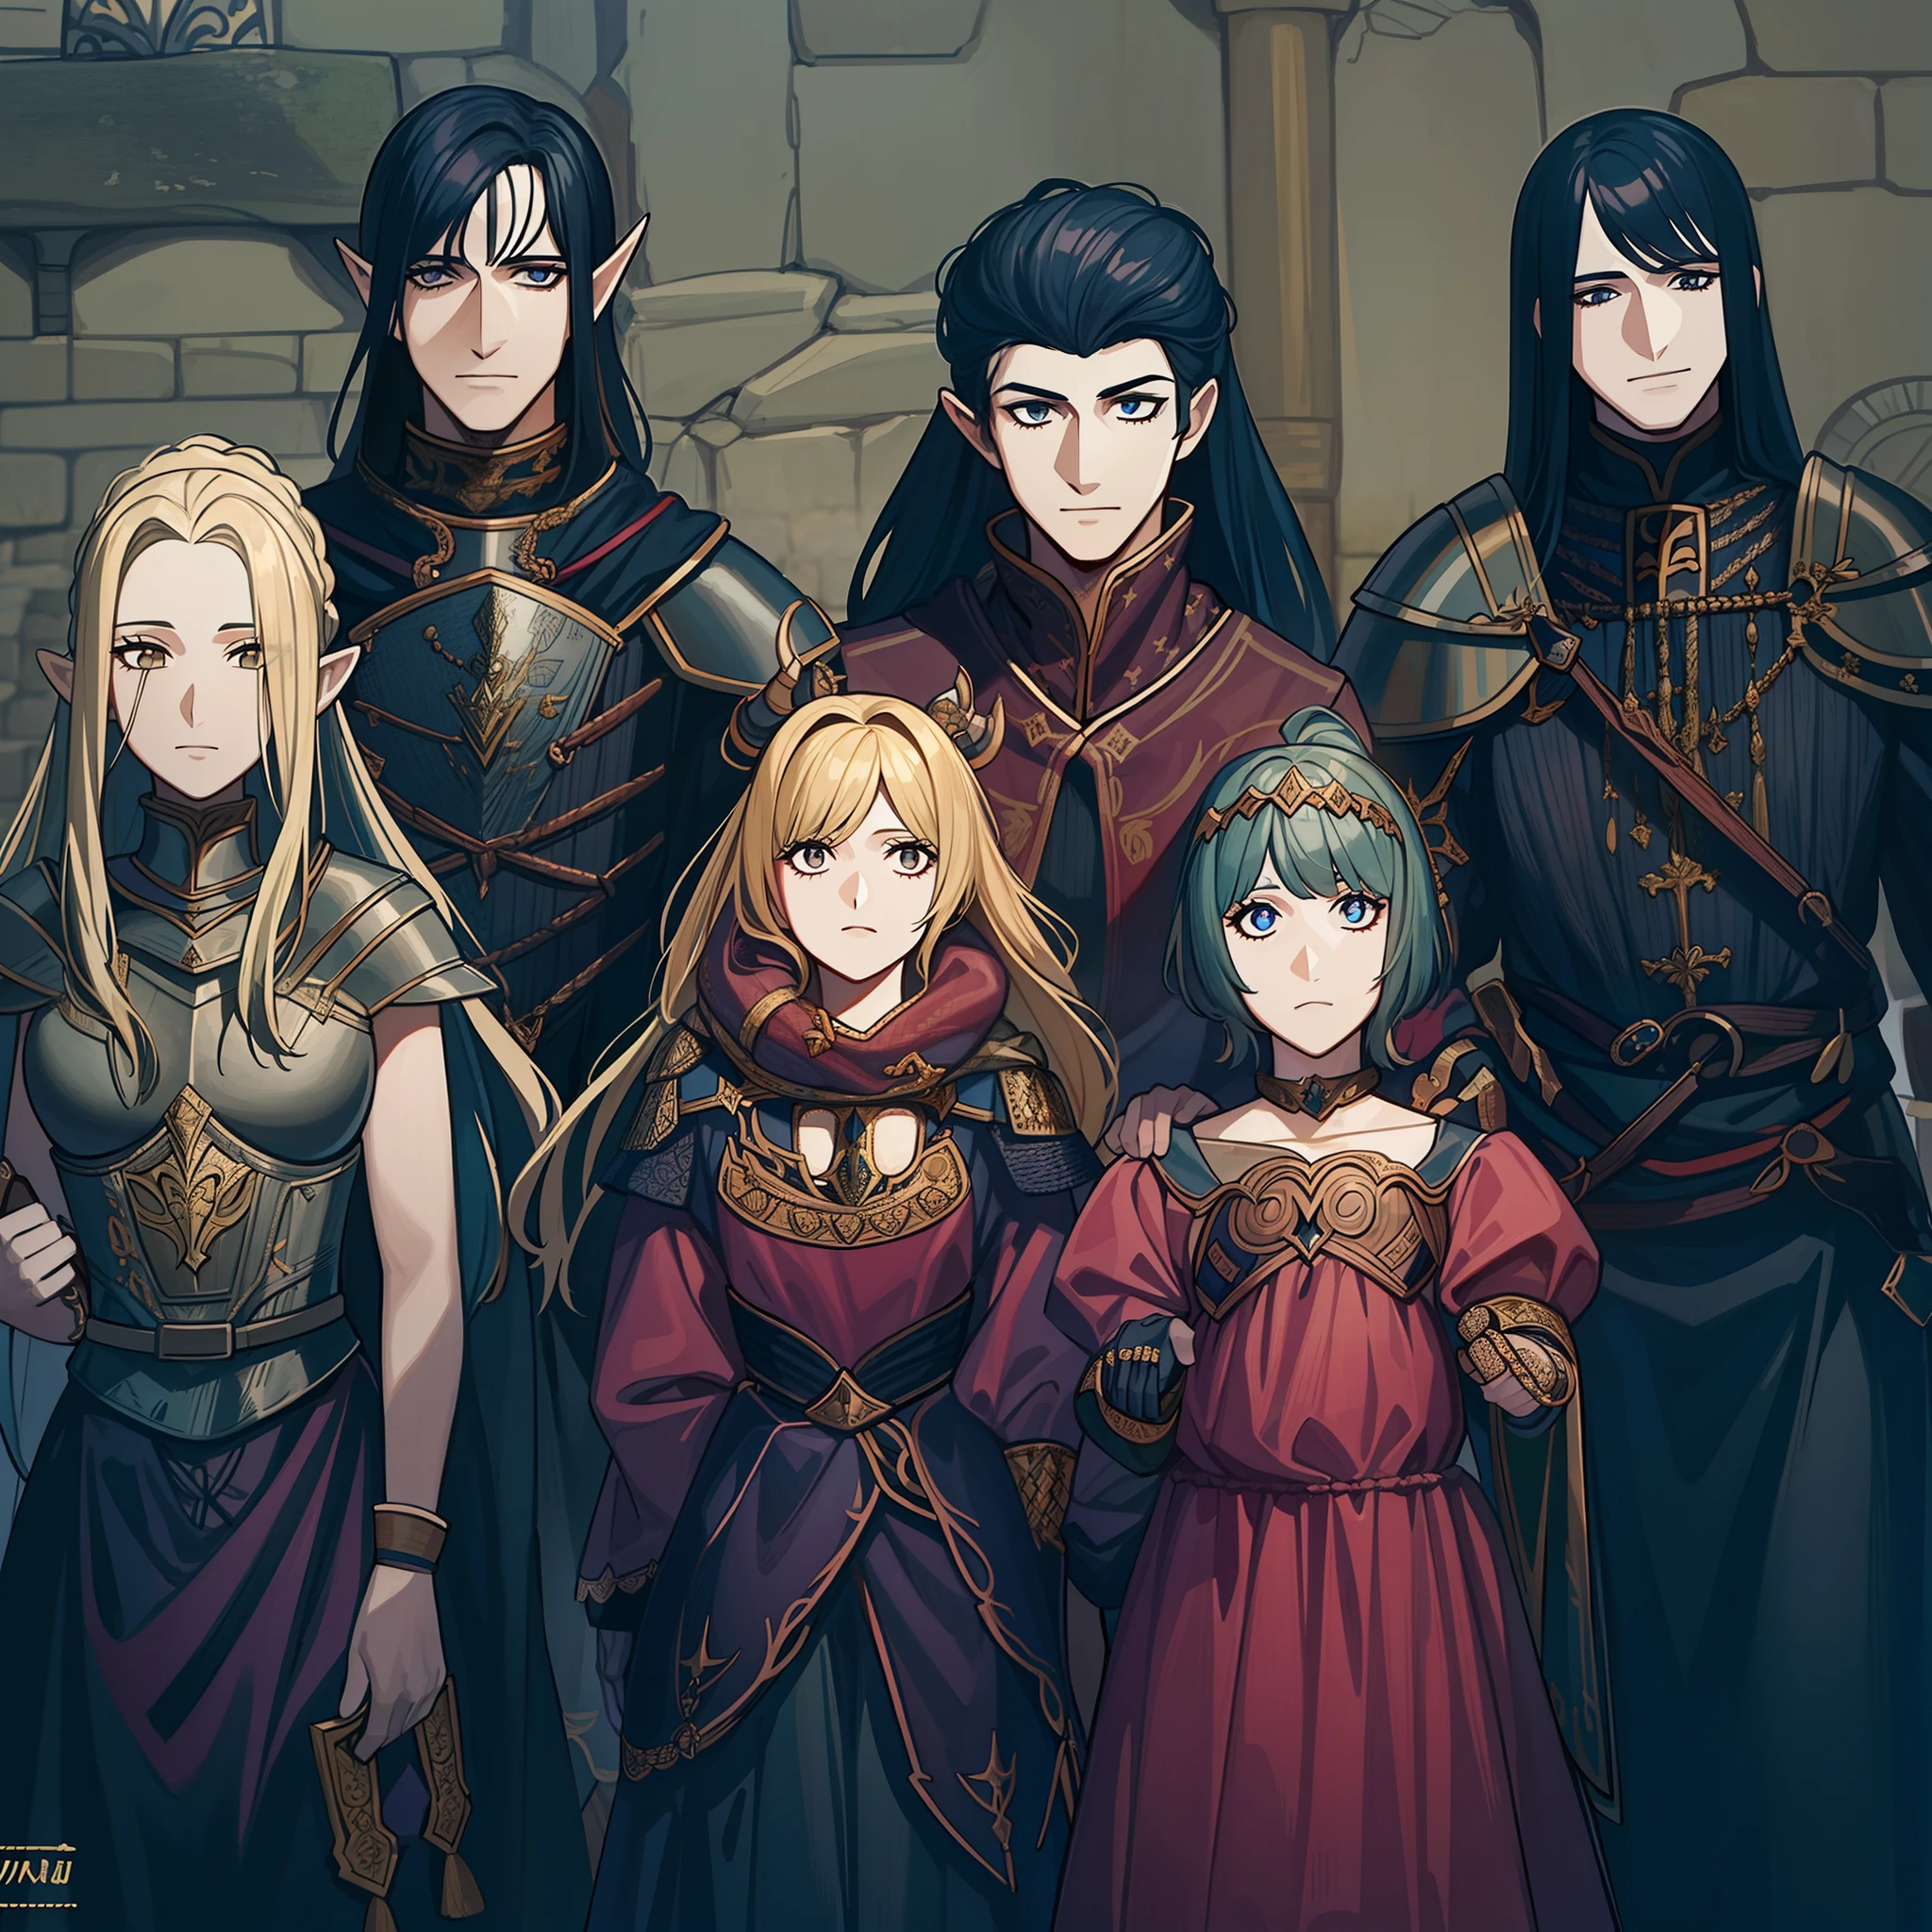 a photograph of a family in medieval times,4 minor elves with 2 other elves being the parents,the elf woman in red armor and the elf father with a calm look, dark sleeve style